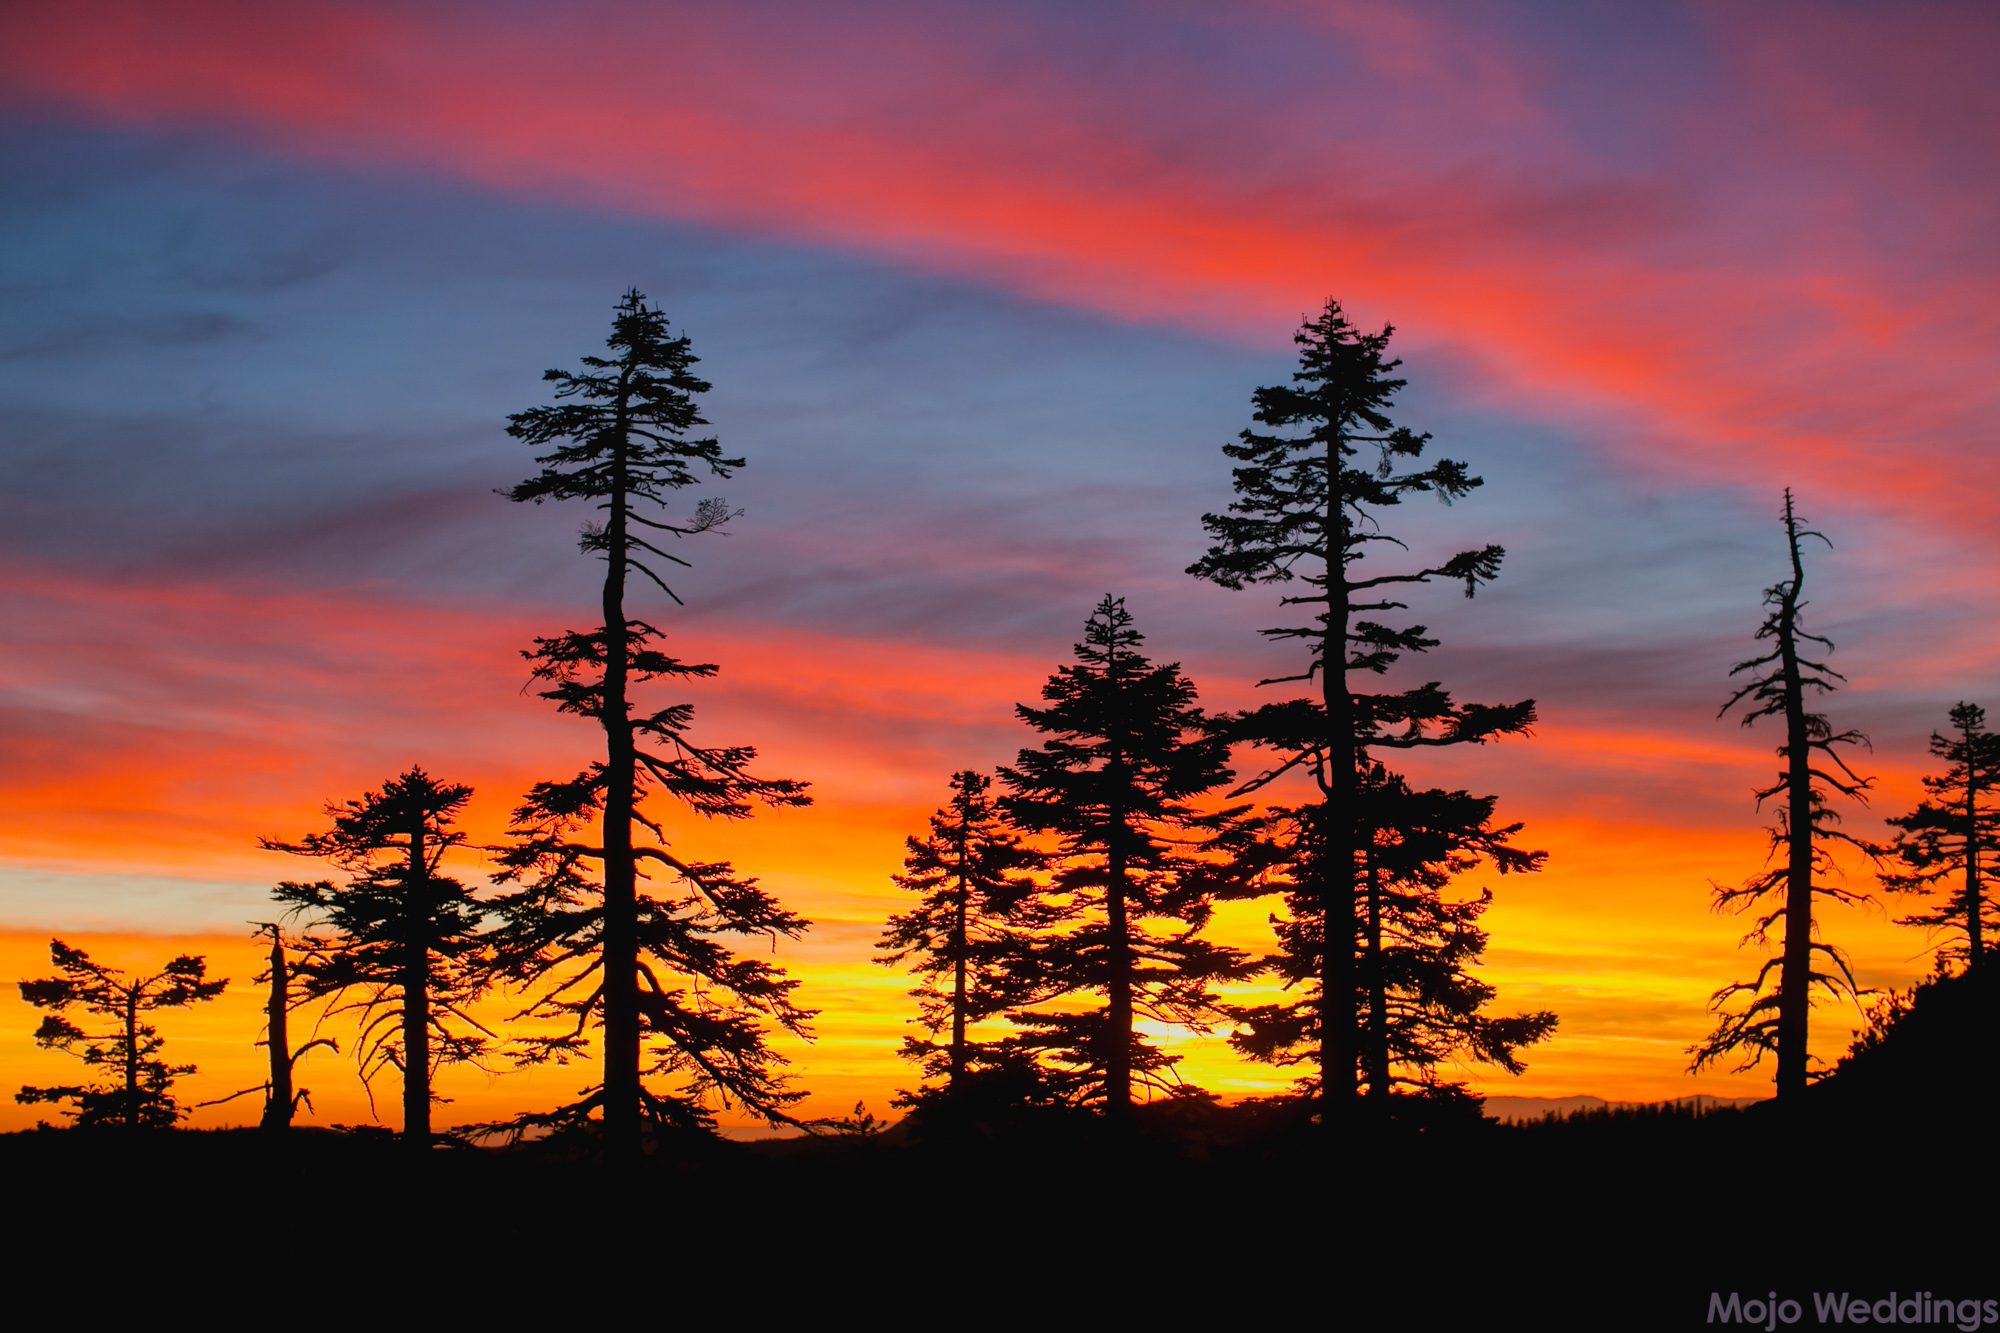 Pine trees are silhouettes against a very bright red, orange, and blue sky.